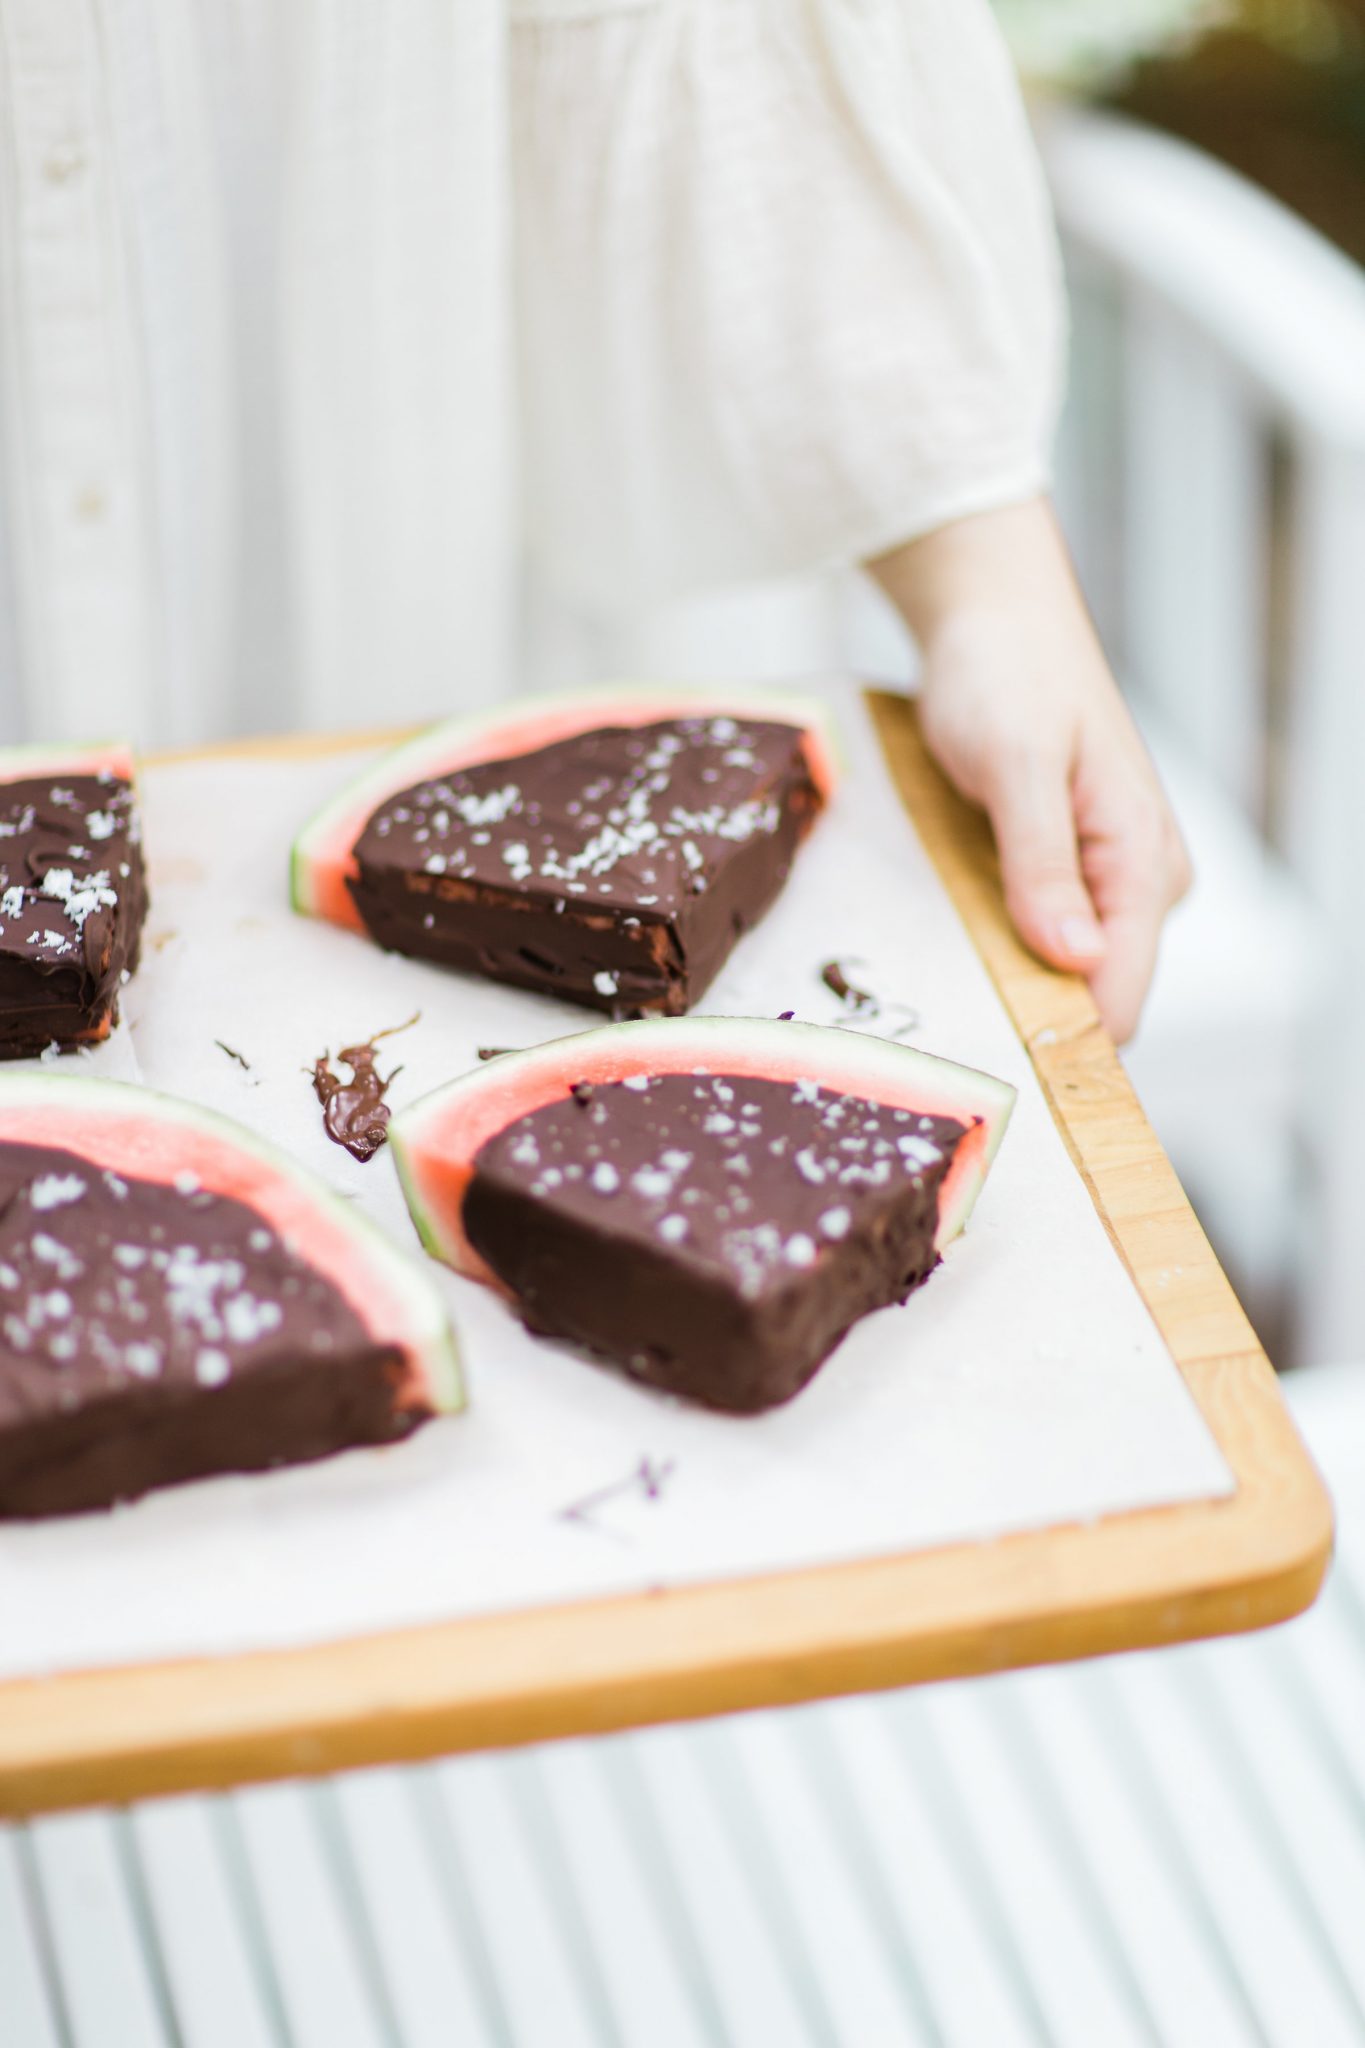 Watermelon Recipes for National Watermelon Day | Salted Dark Chocolate Watermelon Slices